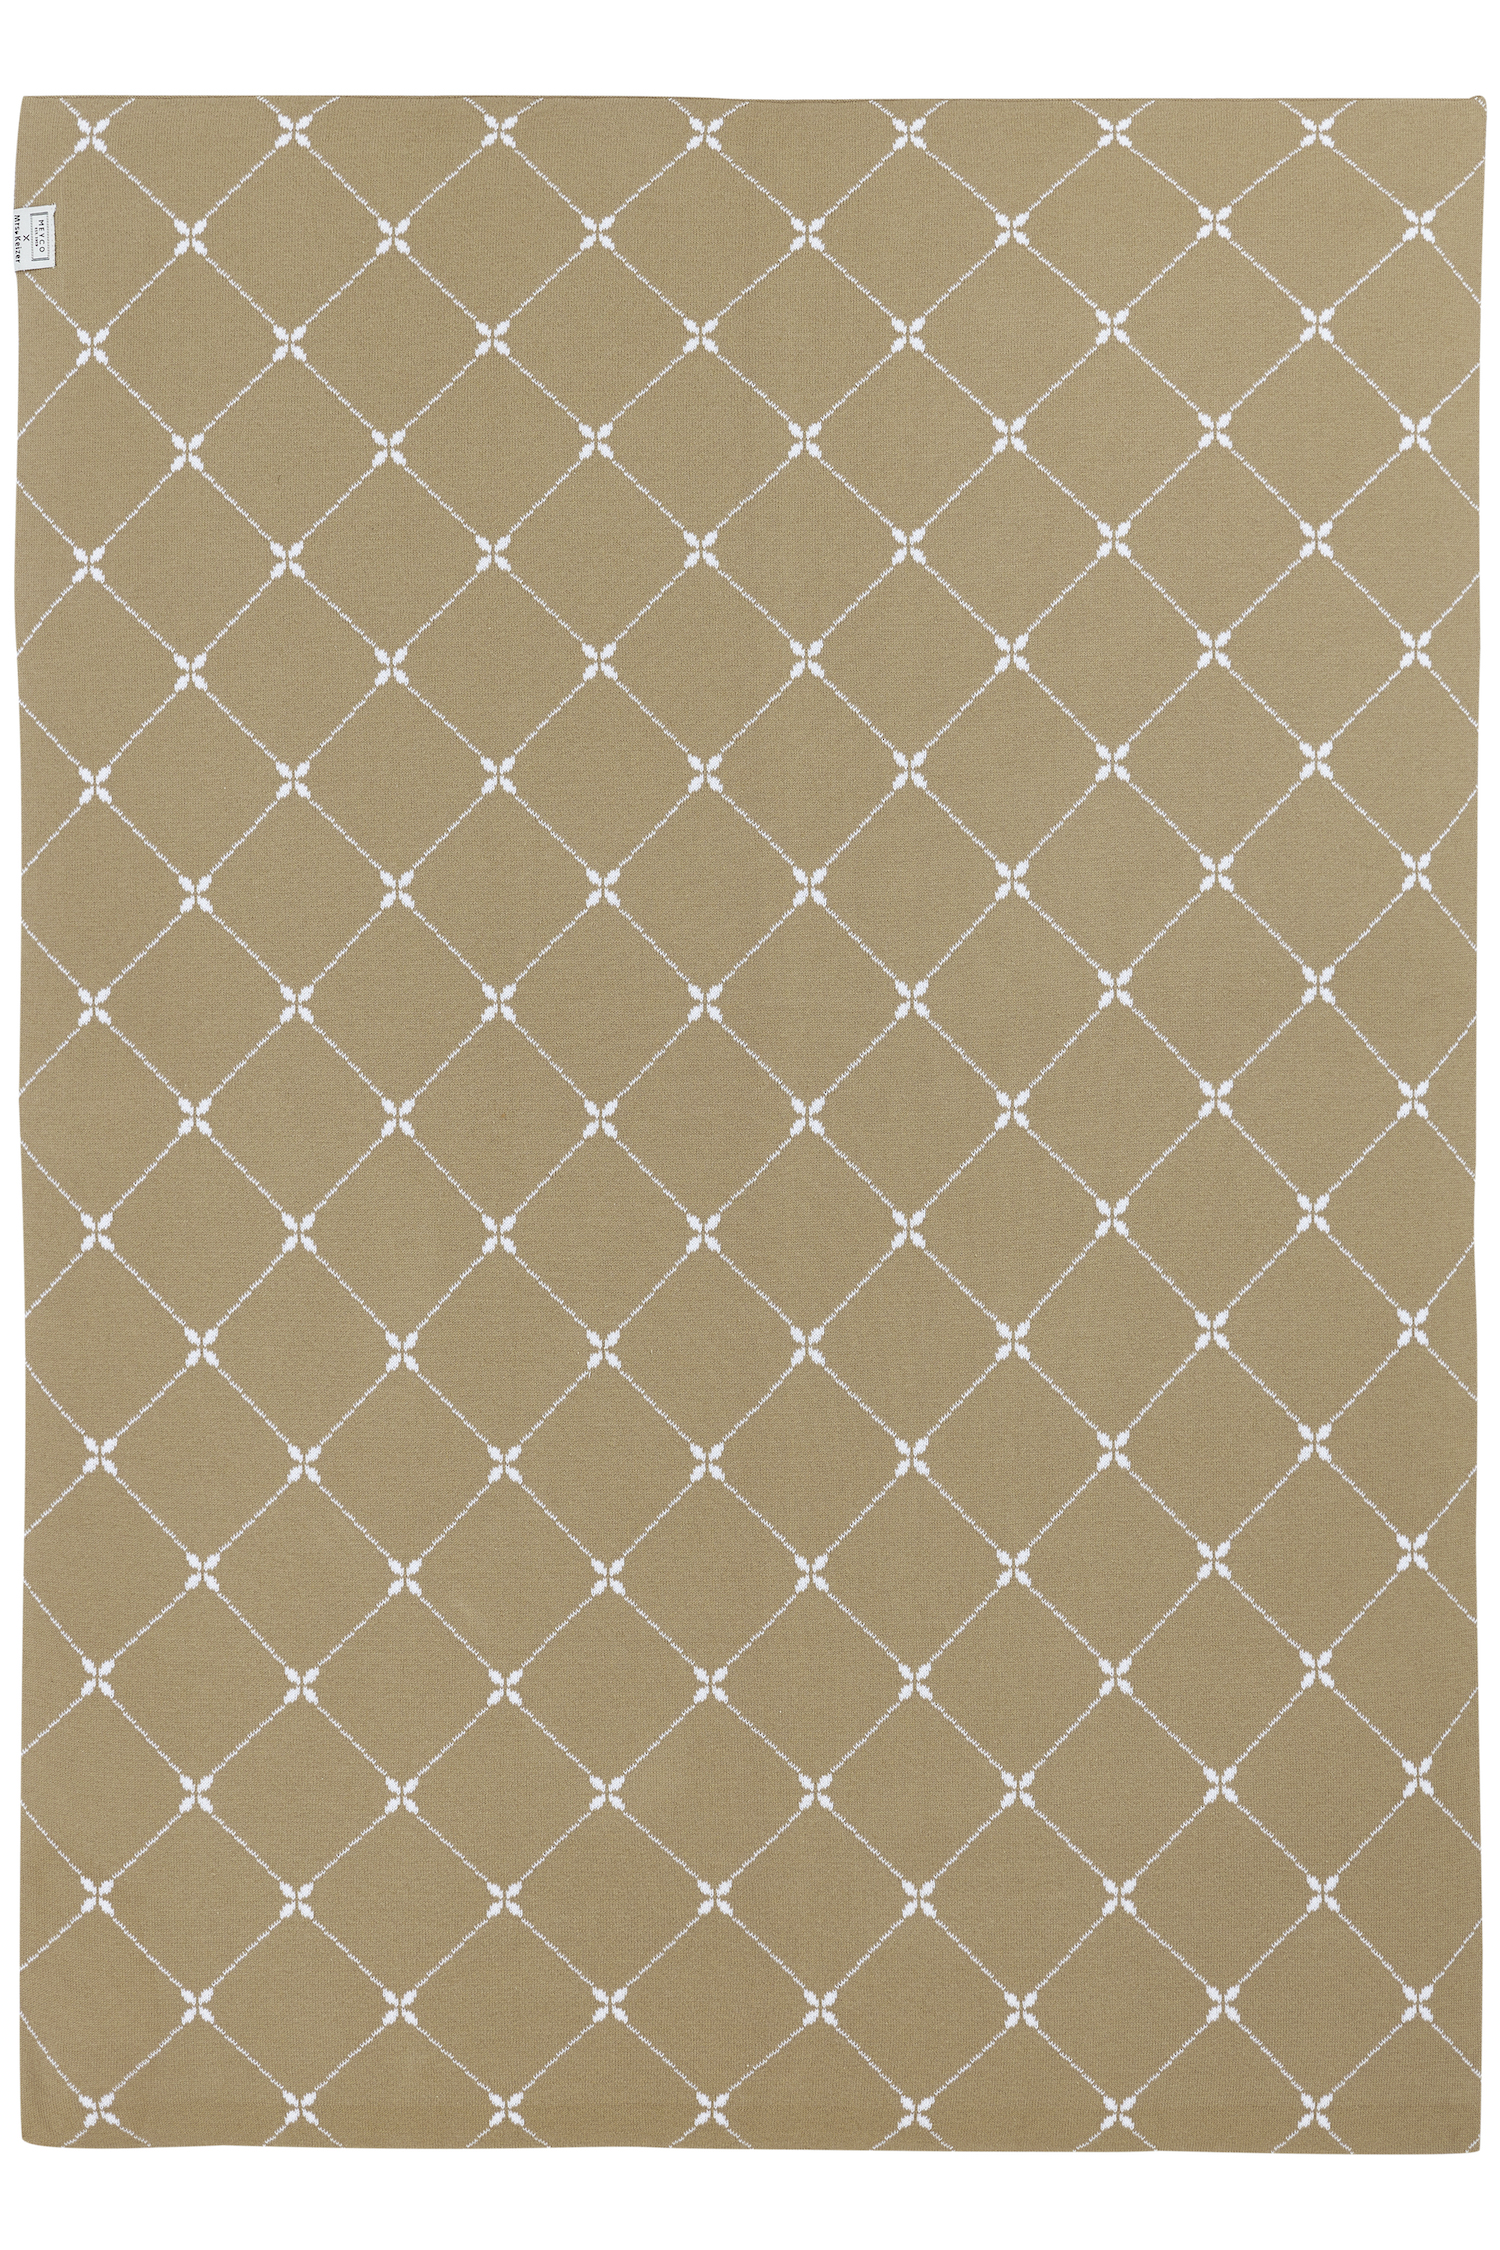 Crib bed blanket Louis - taupe - 75x100cm